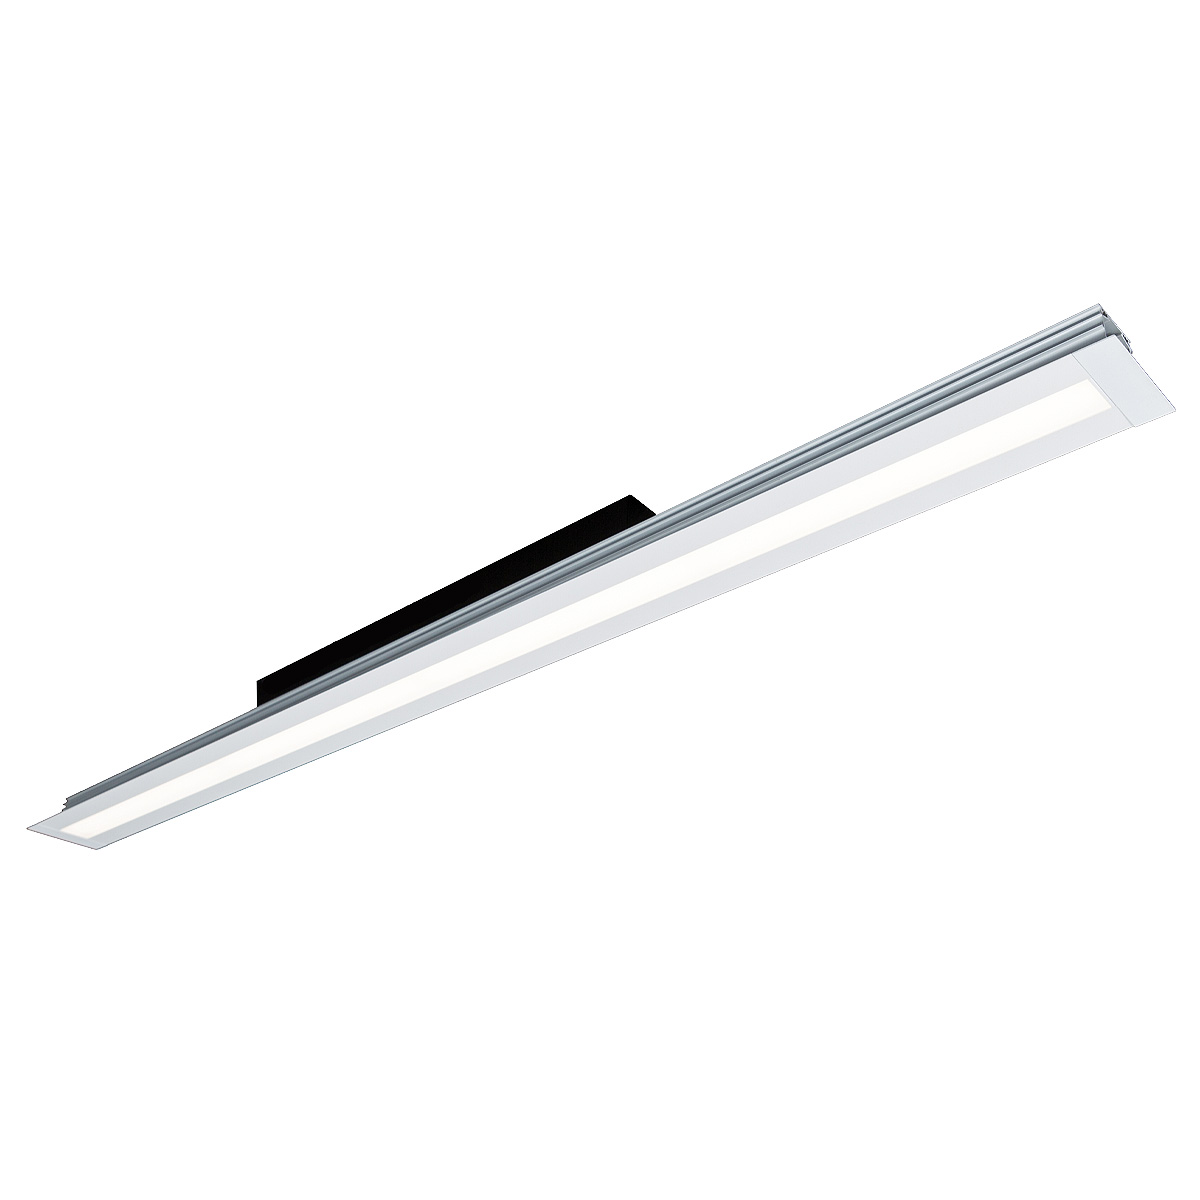 LED Recessed Linear Lines of Light 1.5” for Hard Ceilings (sheetrock only)